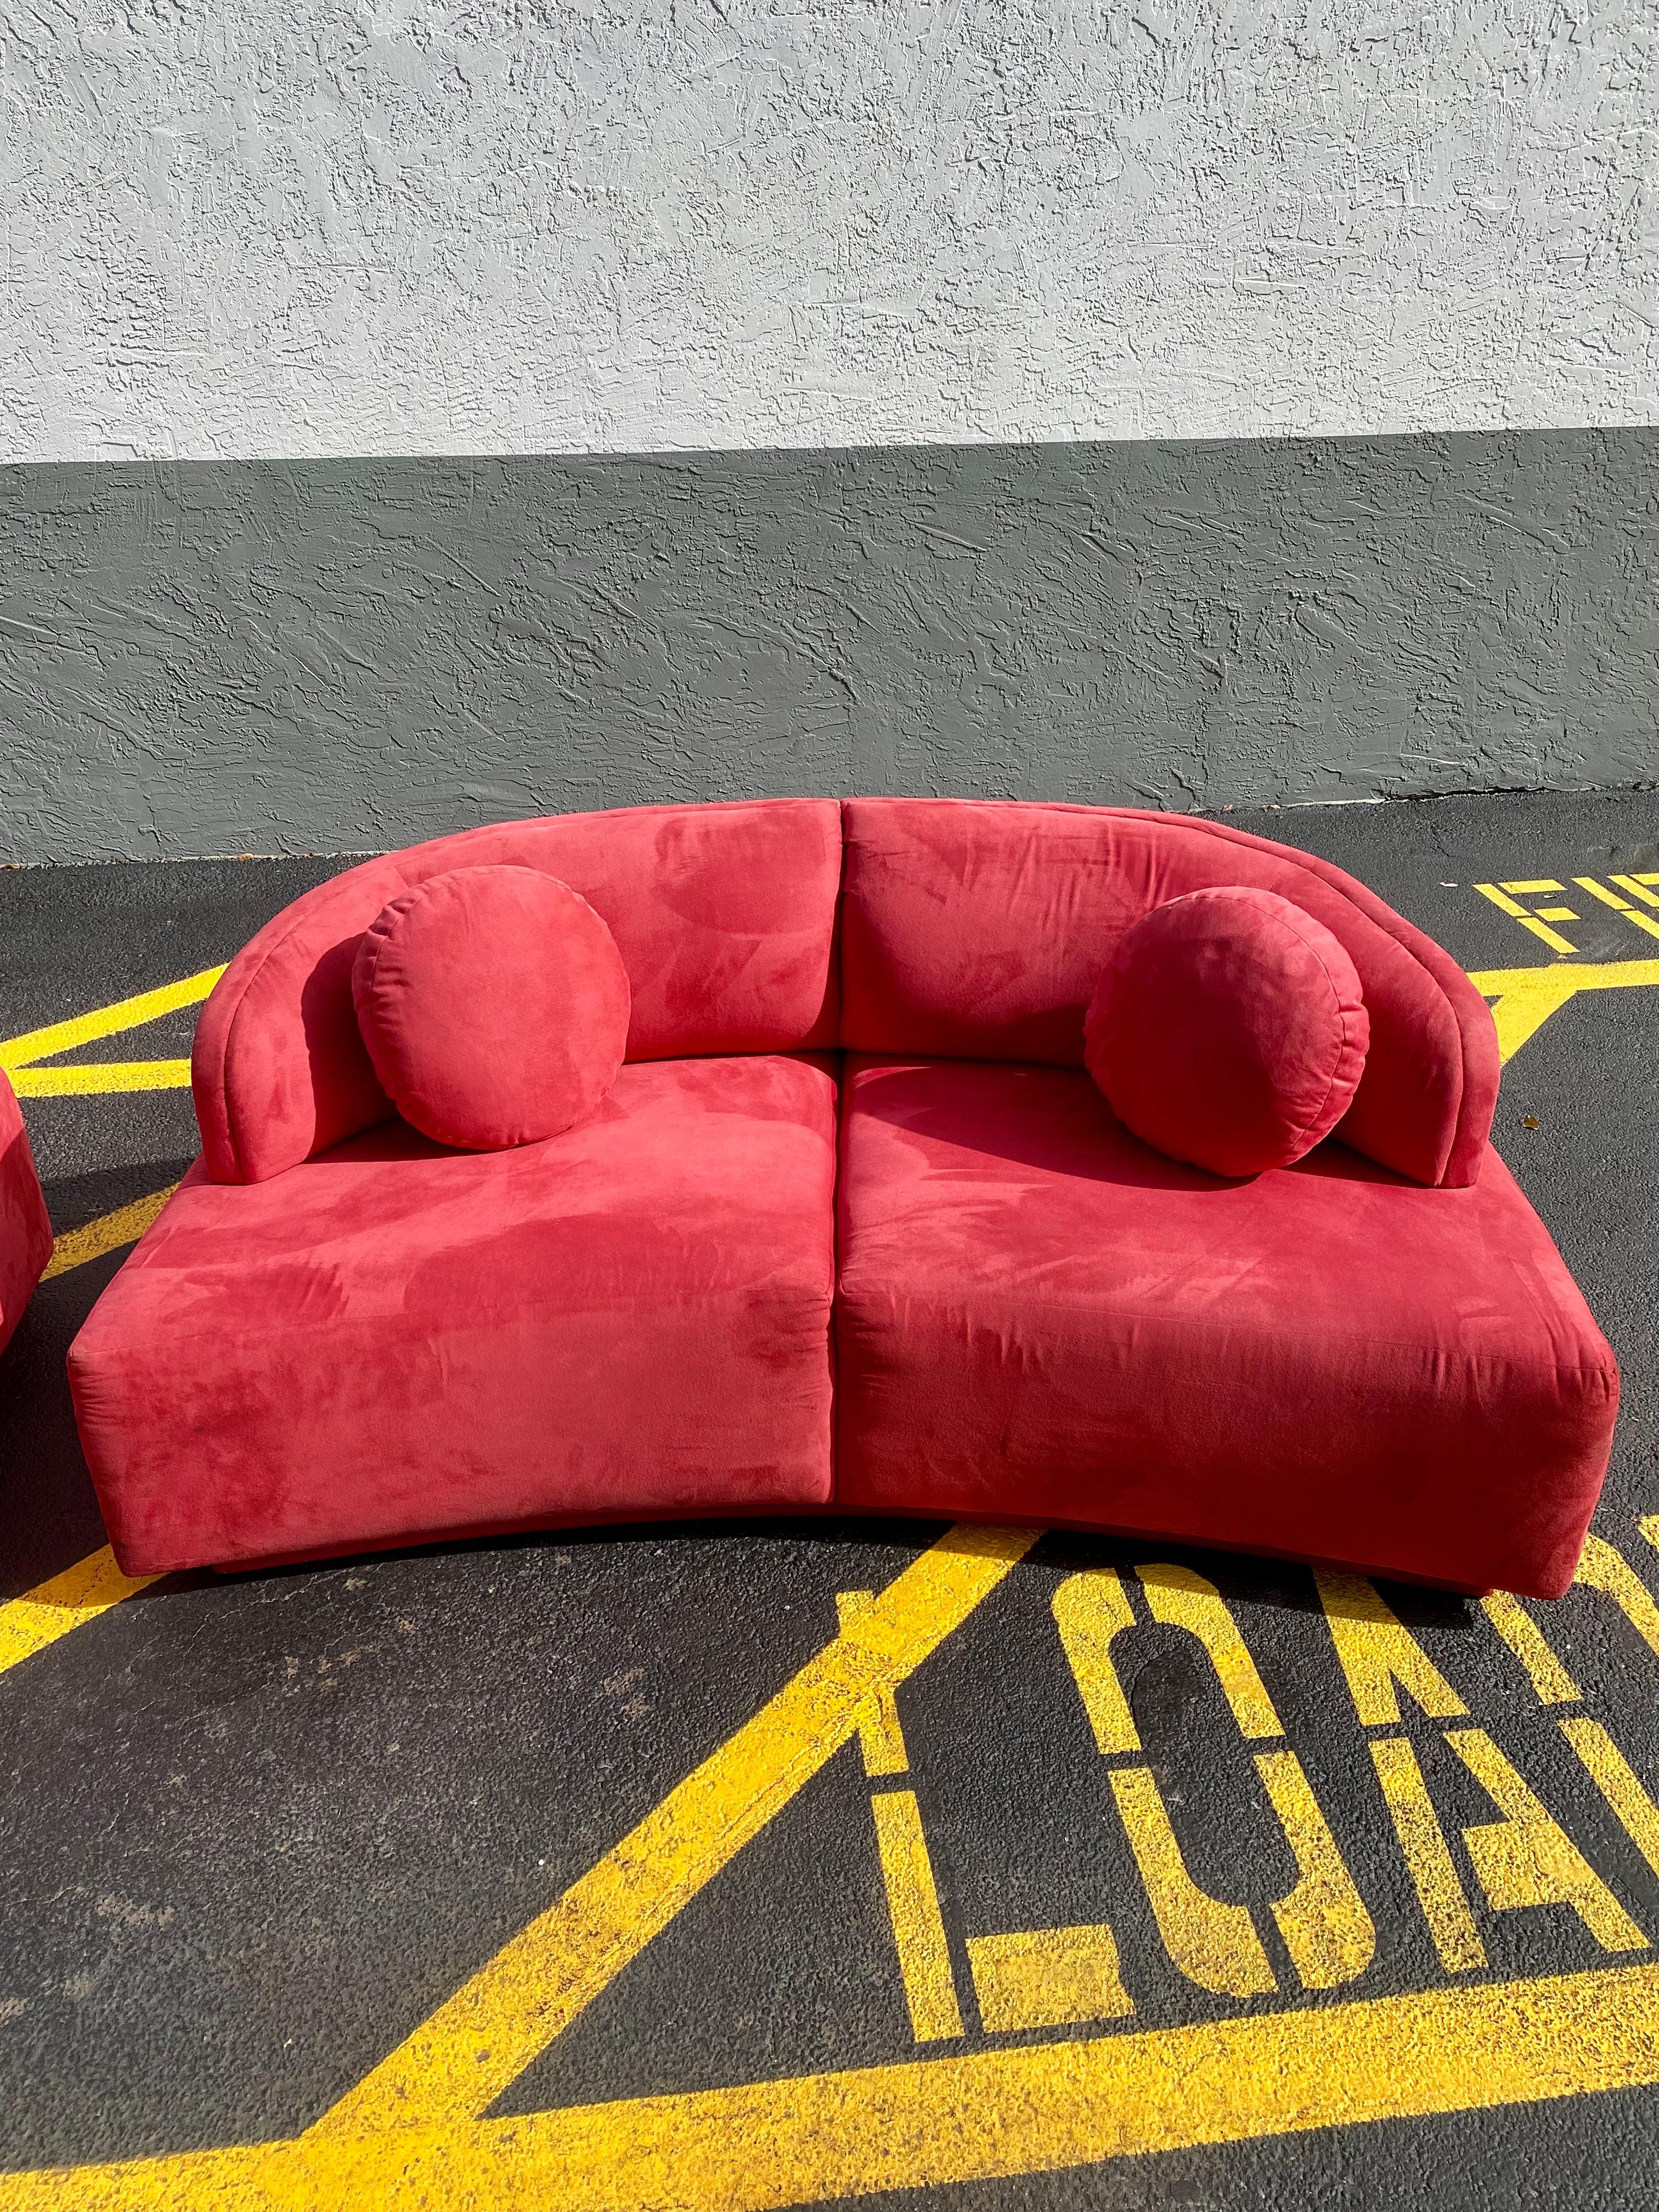 1980s Sculptural Weiman Red Cloud Sofa Loveseat, Set of 2 In Good Condition For Sale In Fort Lauderdale, FL